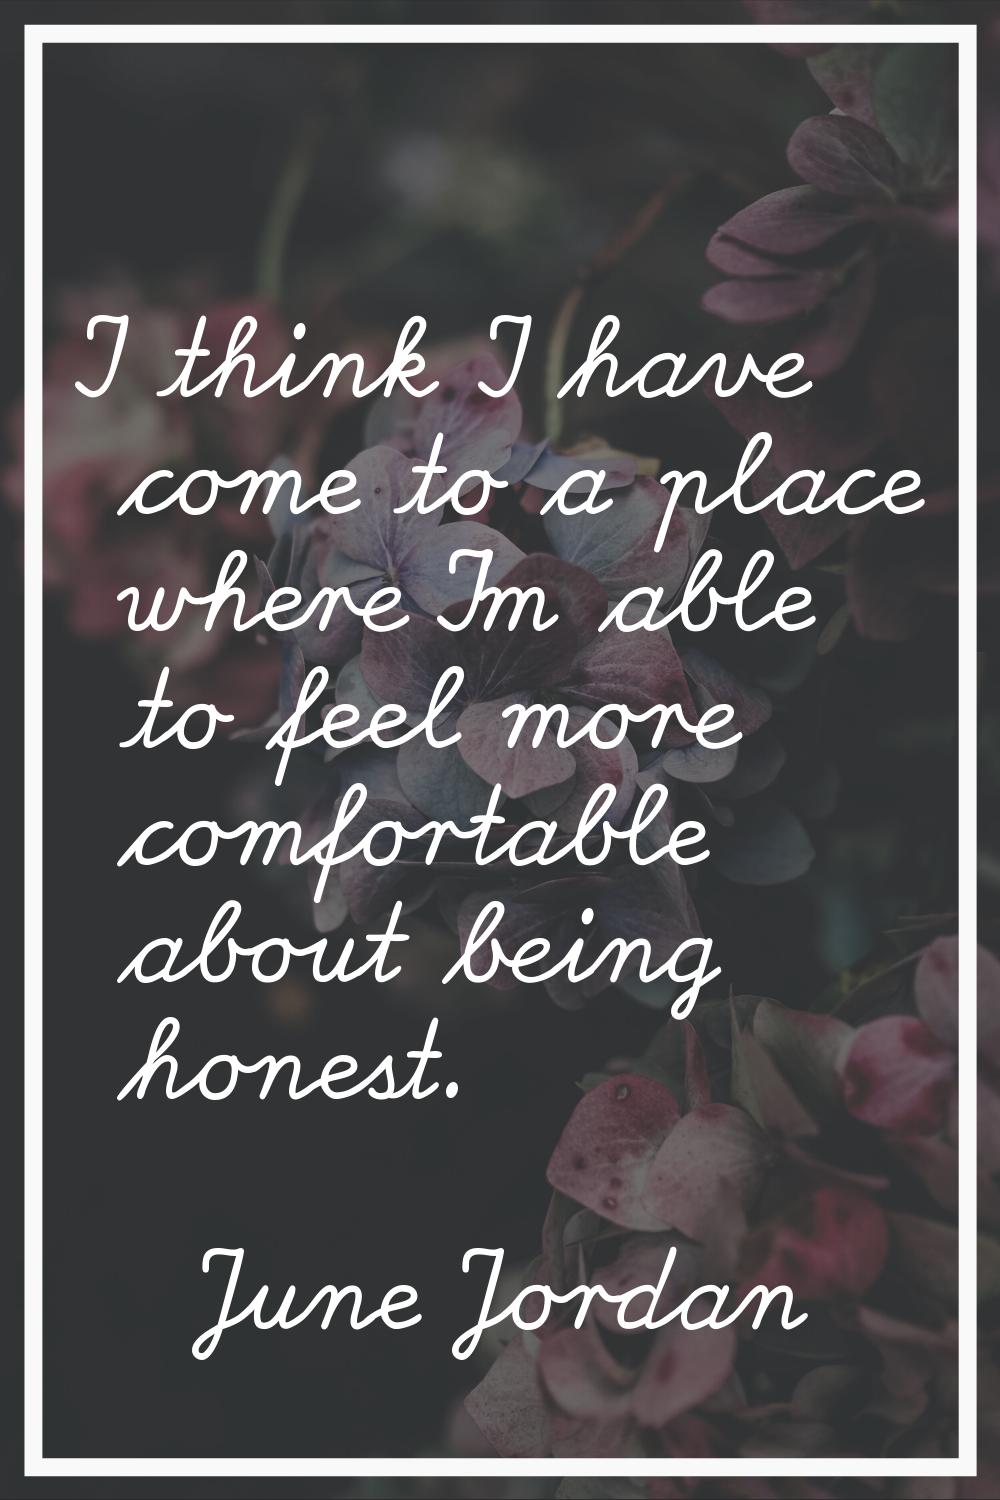 I think I have come to a place where I'm able to feel more comfortable about being honest.